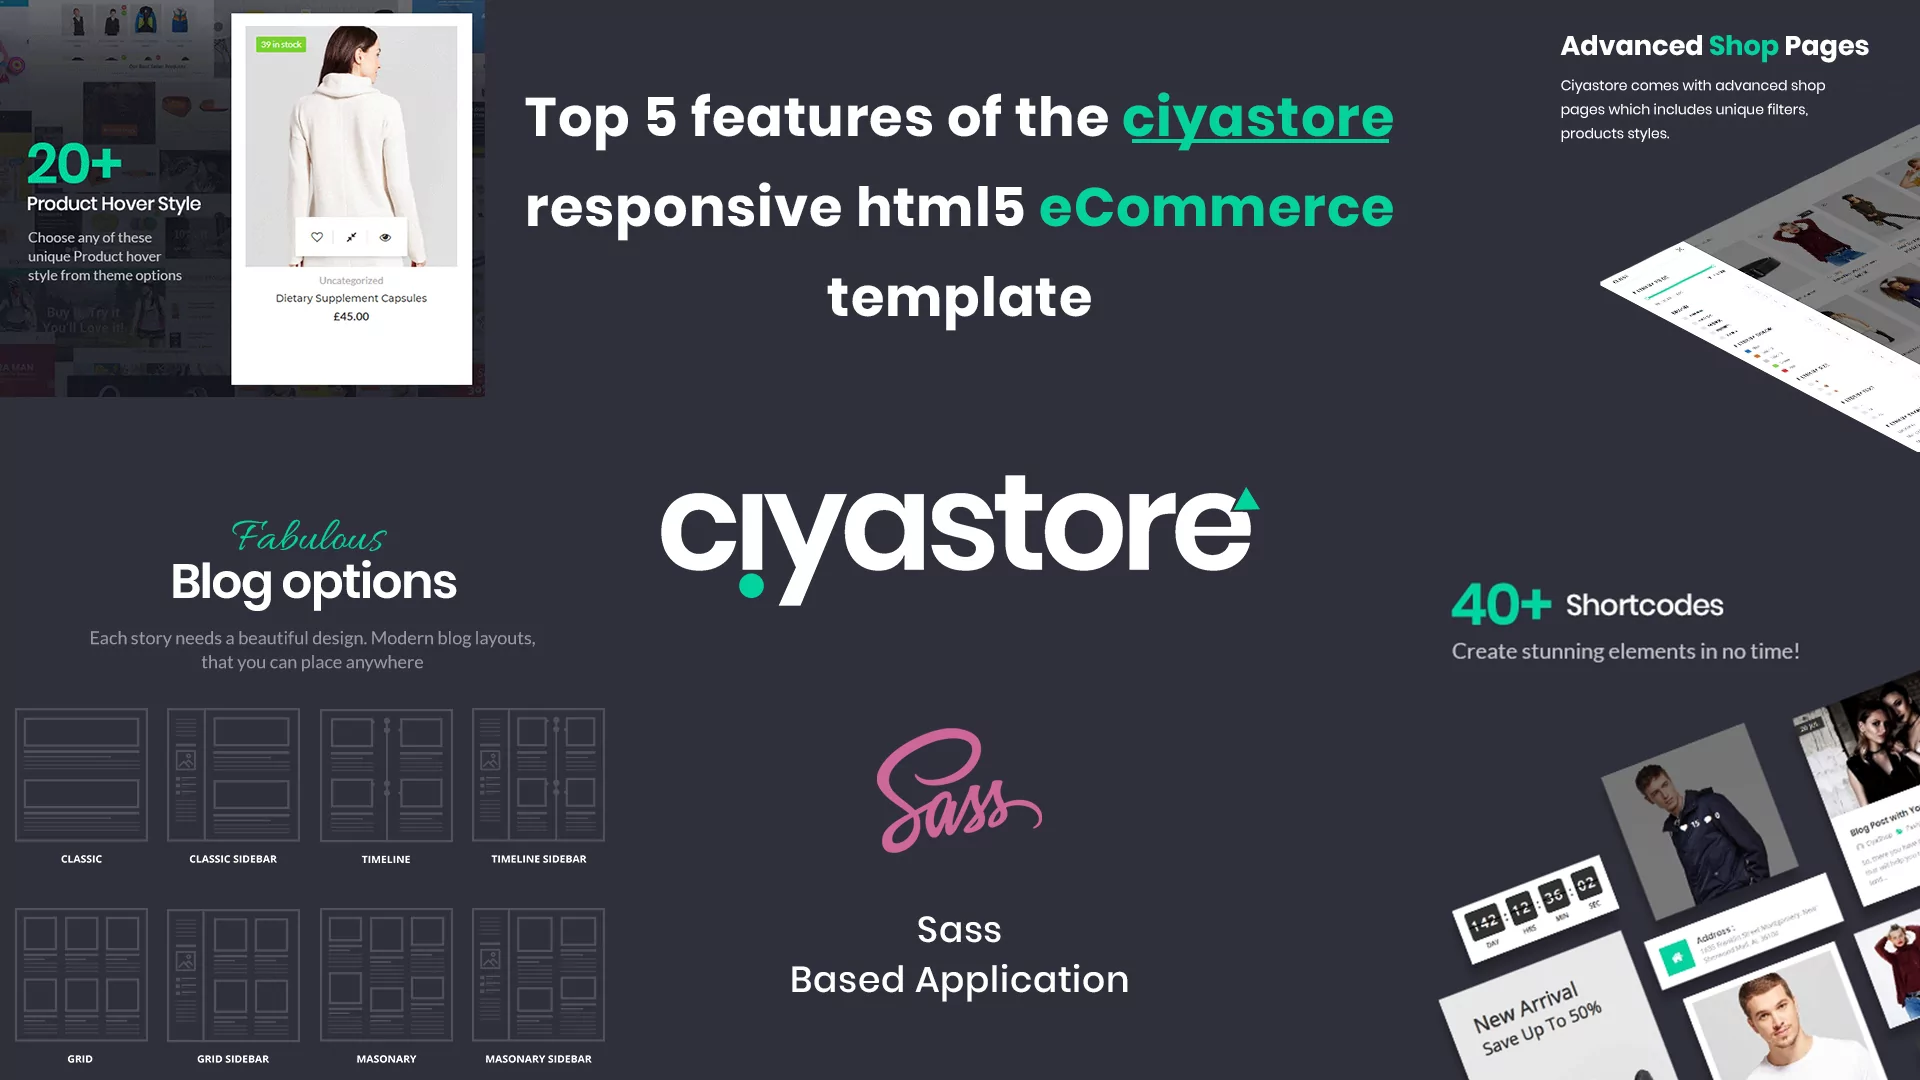 Top 5 features of the Ciyastore responsive html5 eCommerce template